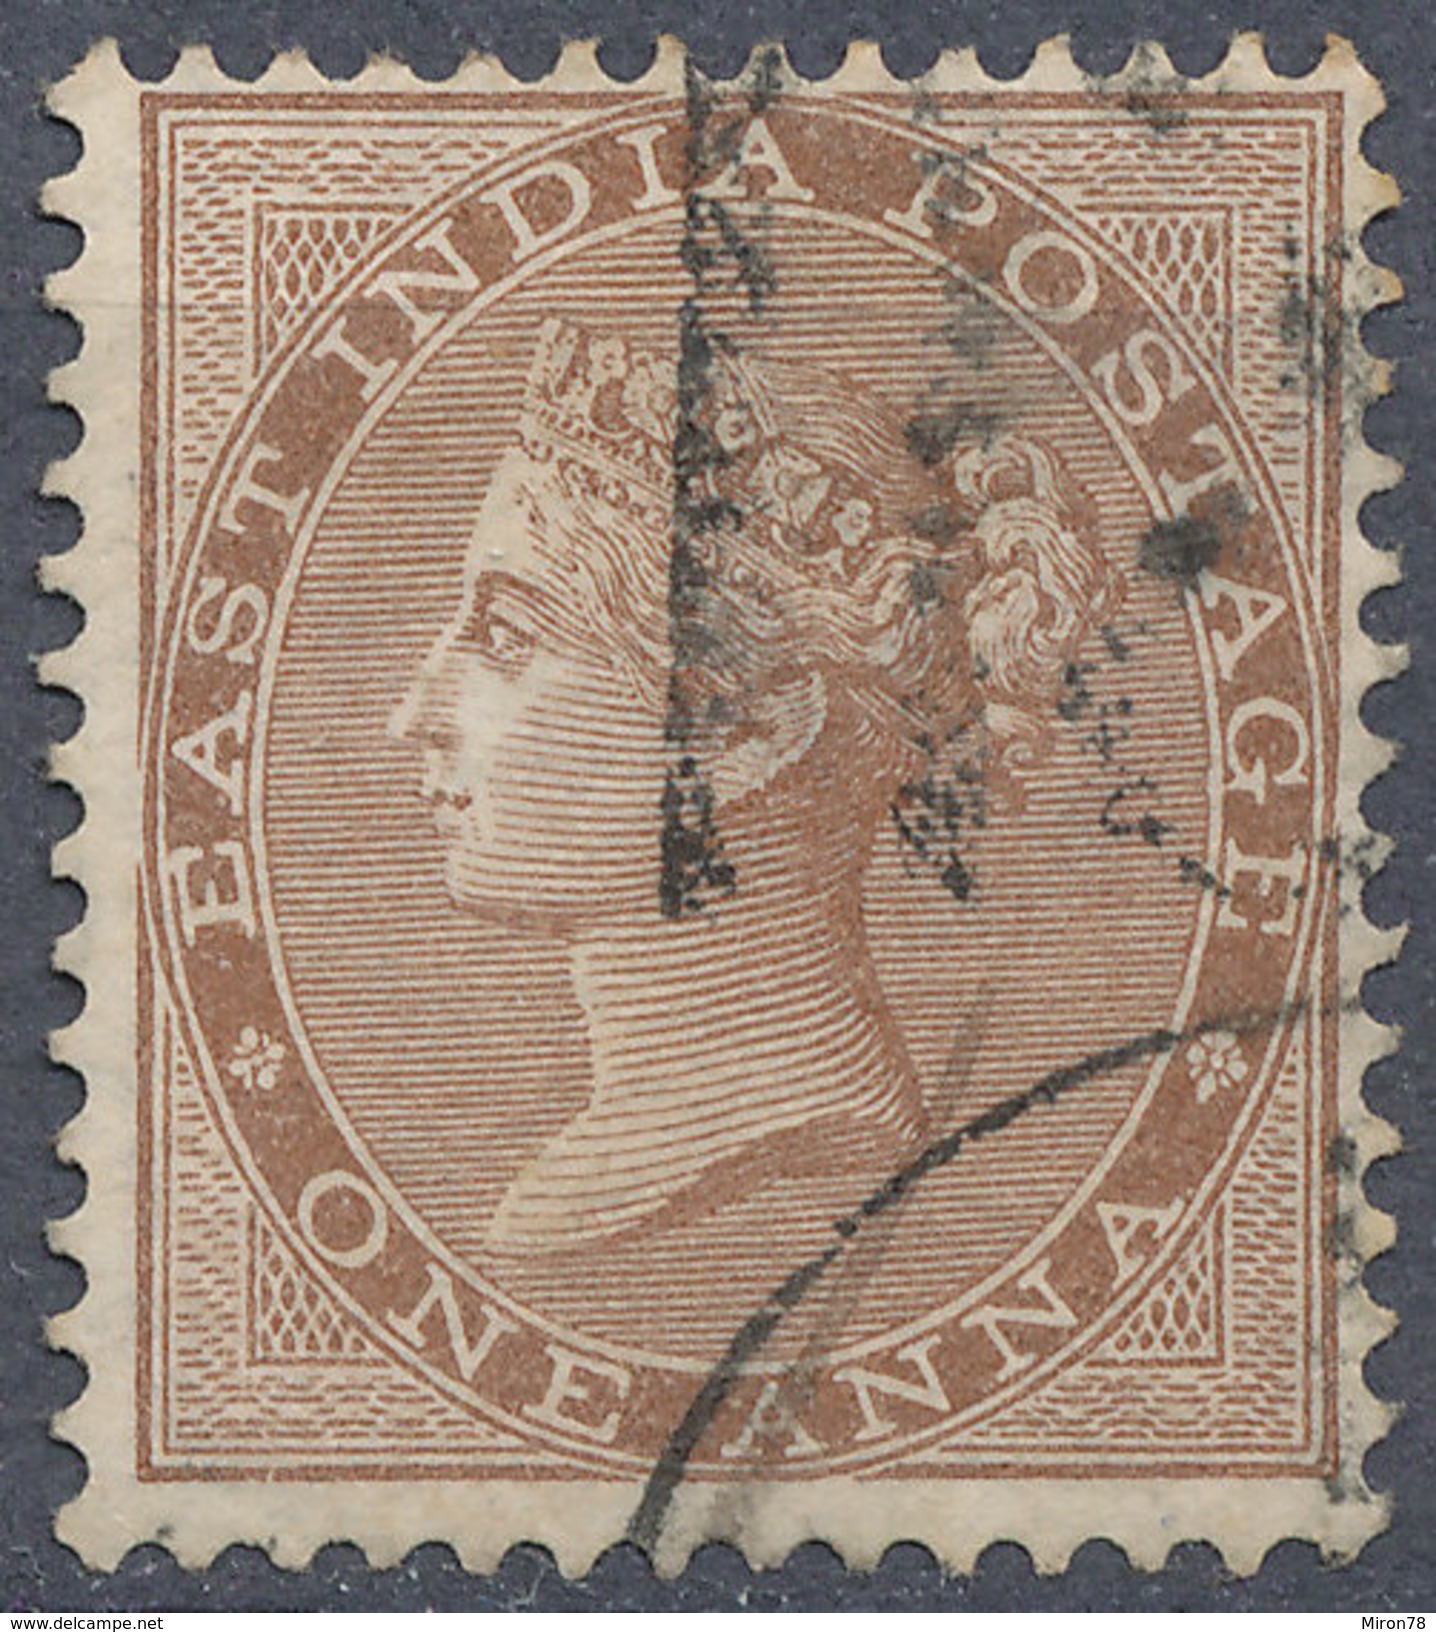 Stamp   India  Queen Victoria 1a Used Lot#22 - 1852 District De Scinde